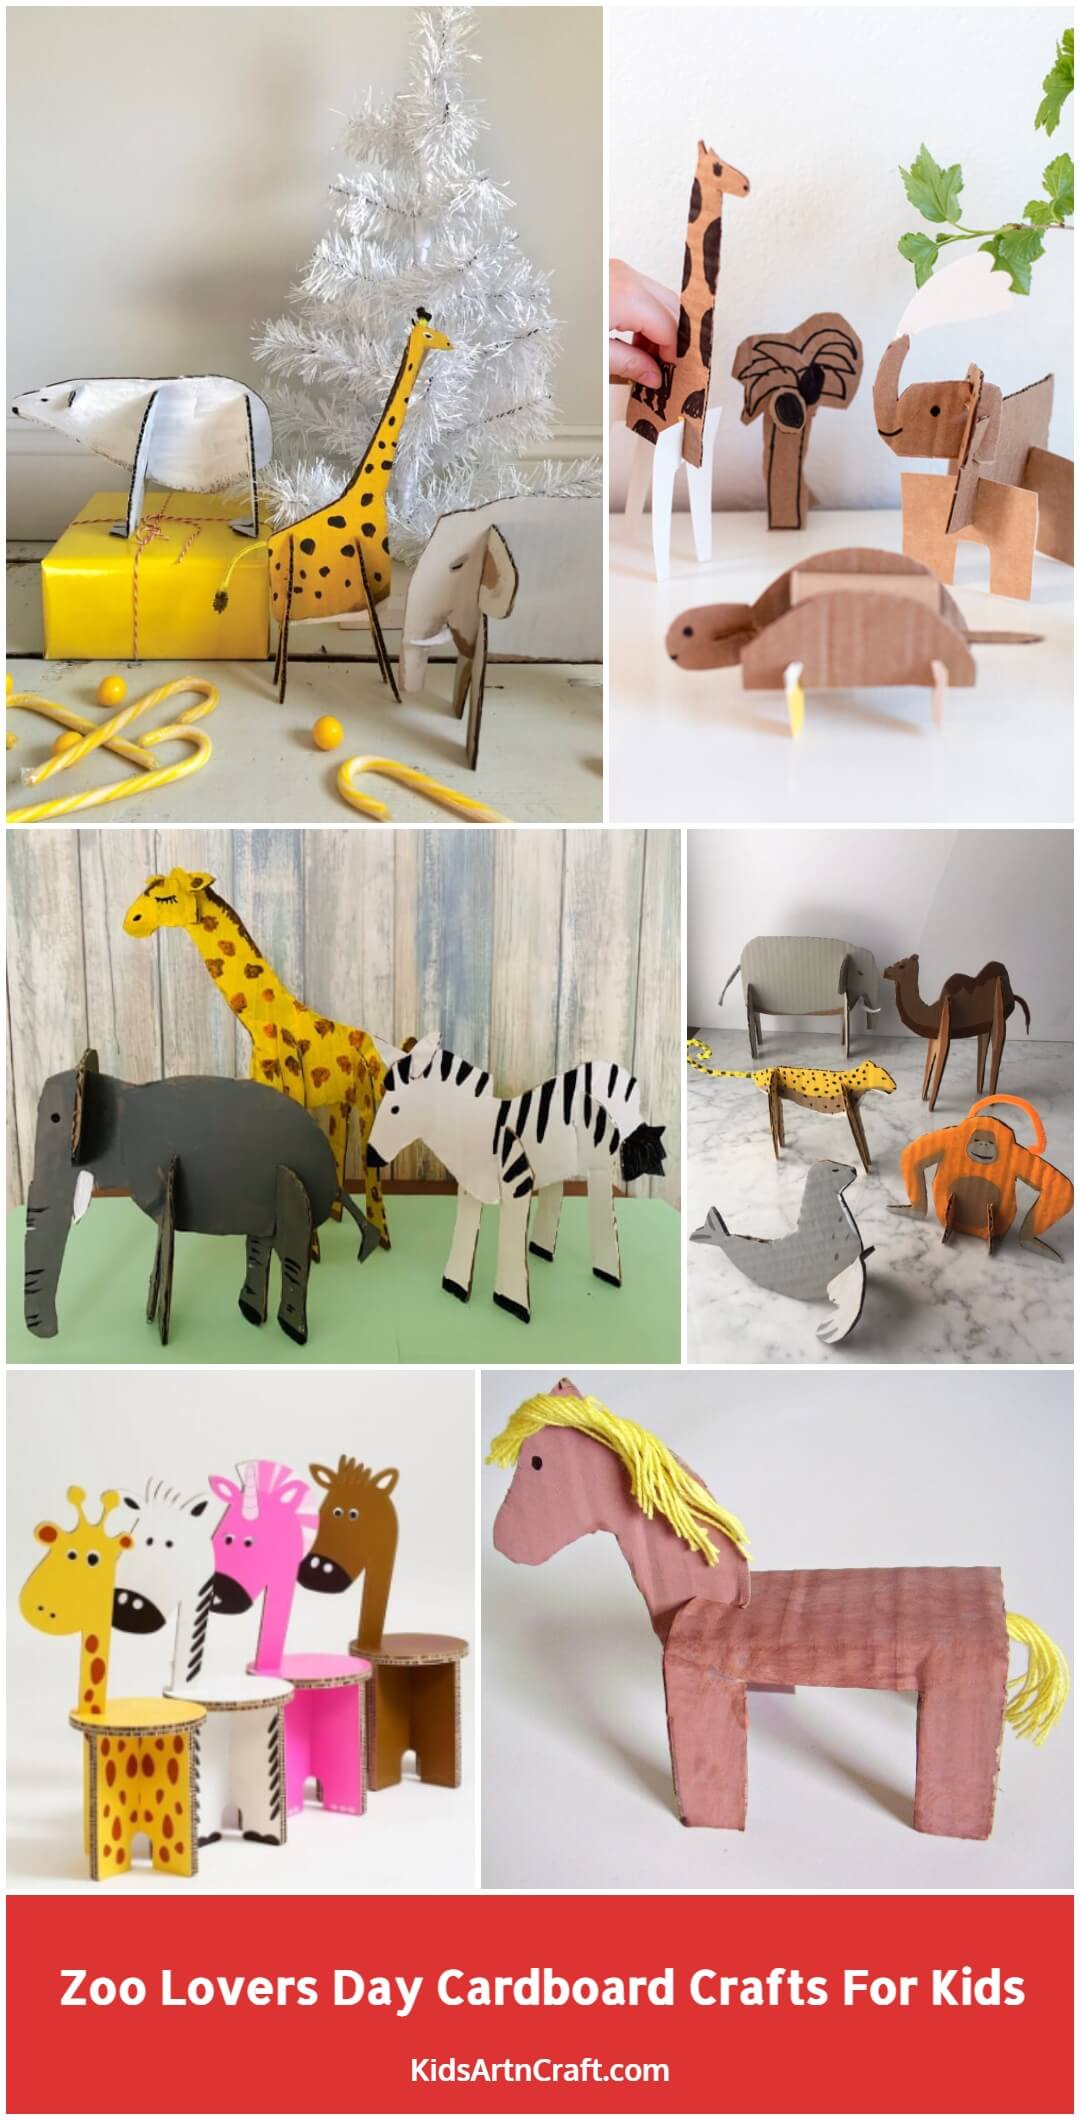 Zoo Lovers Day Cardboard Crafts for Kids - Kids Art & Craft